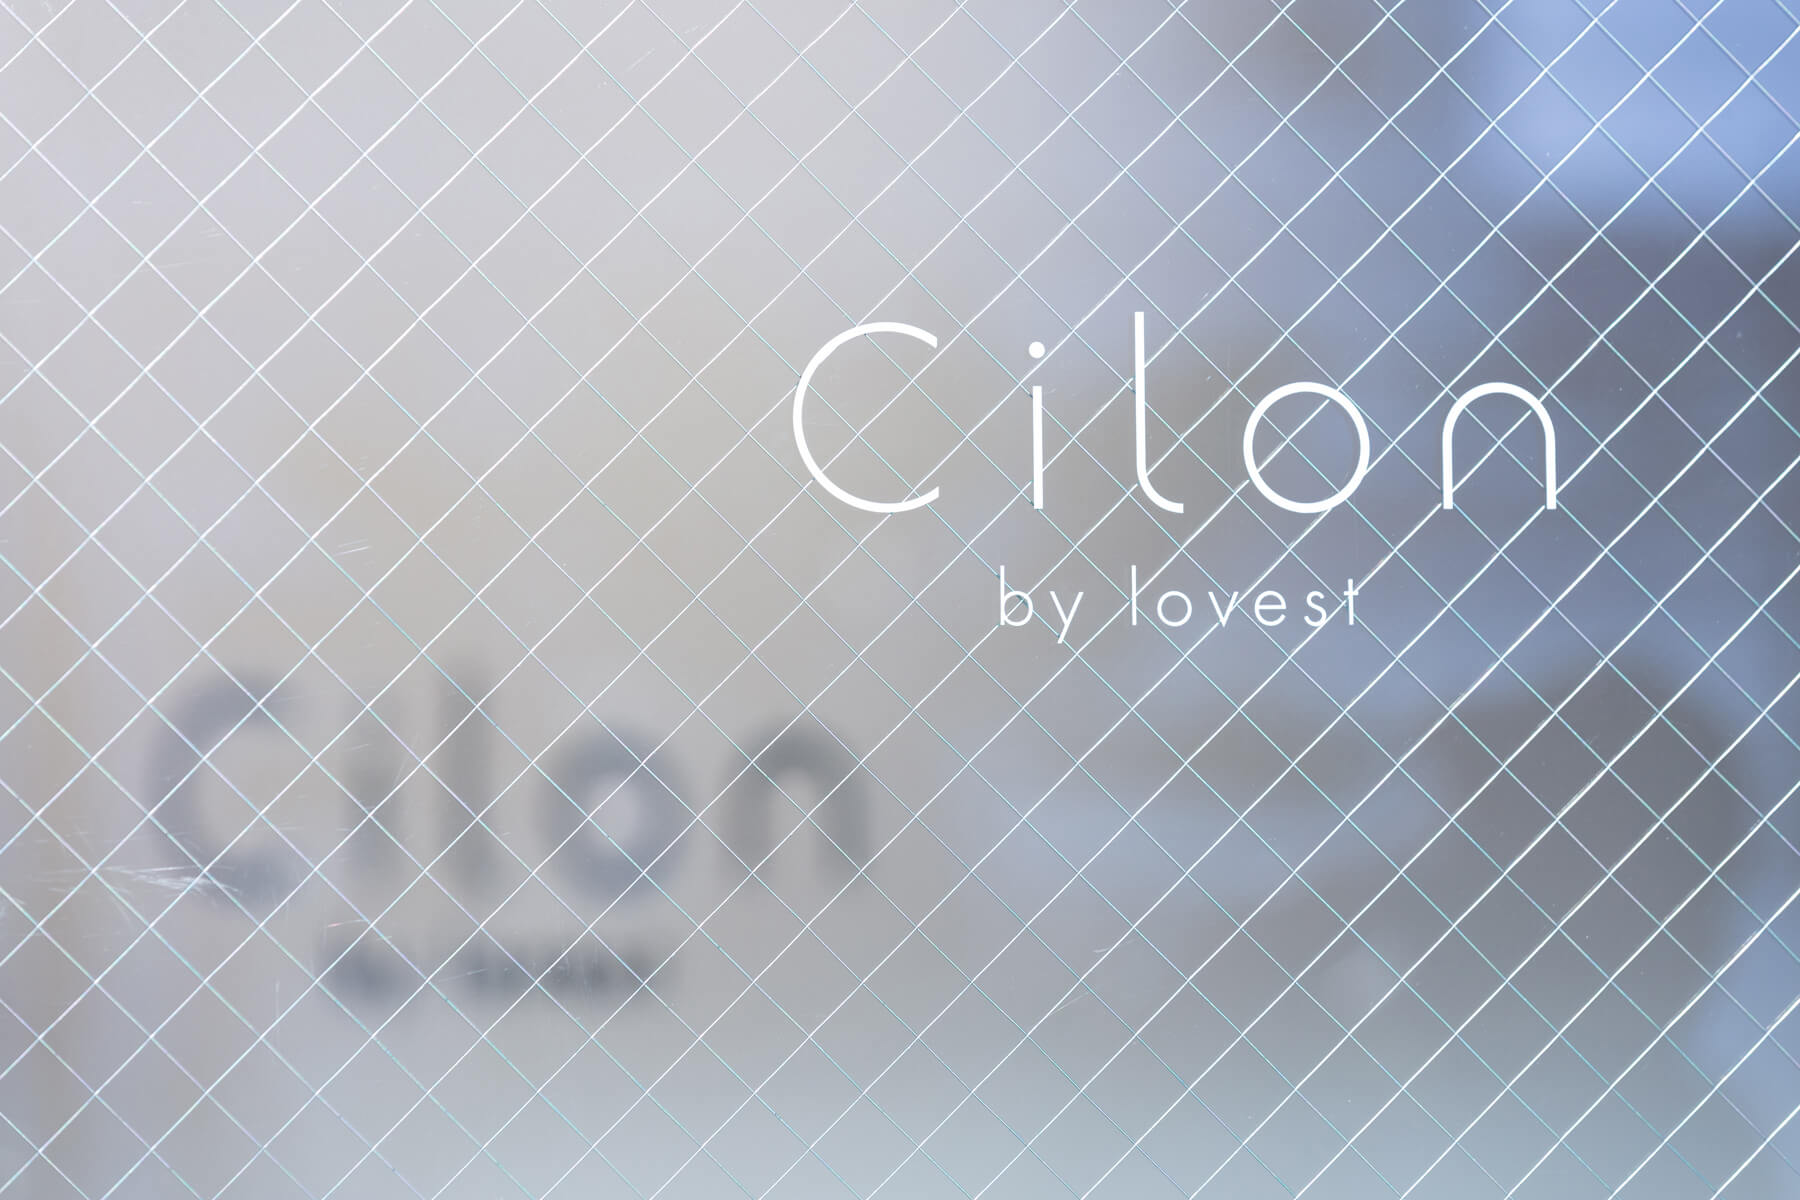 Cilon by lovest／Mie